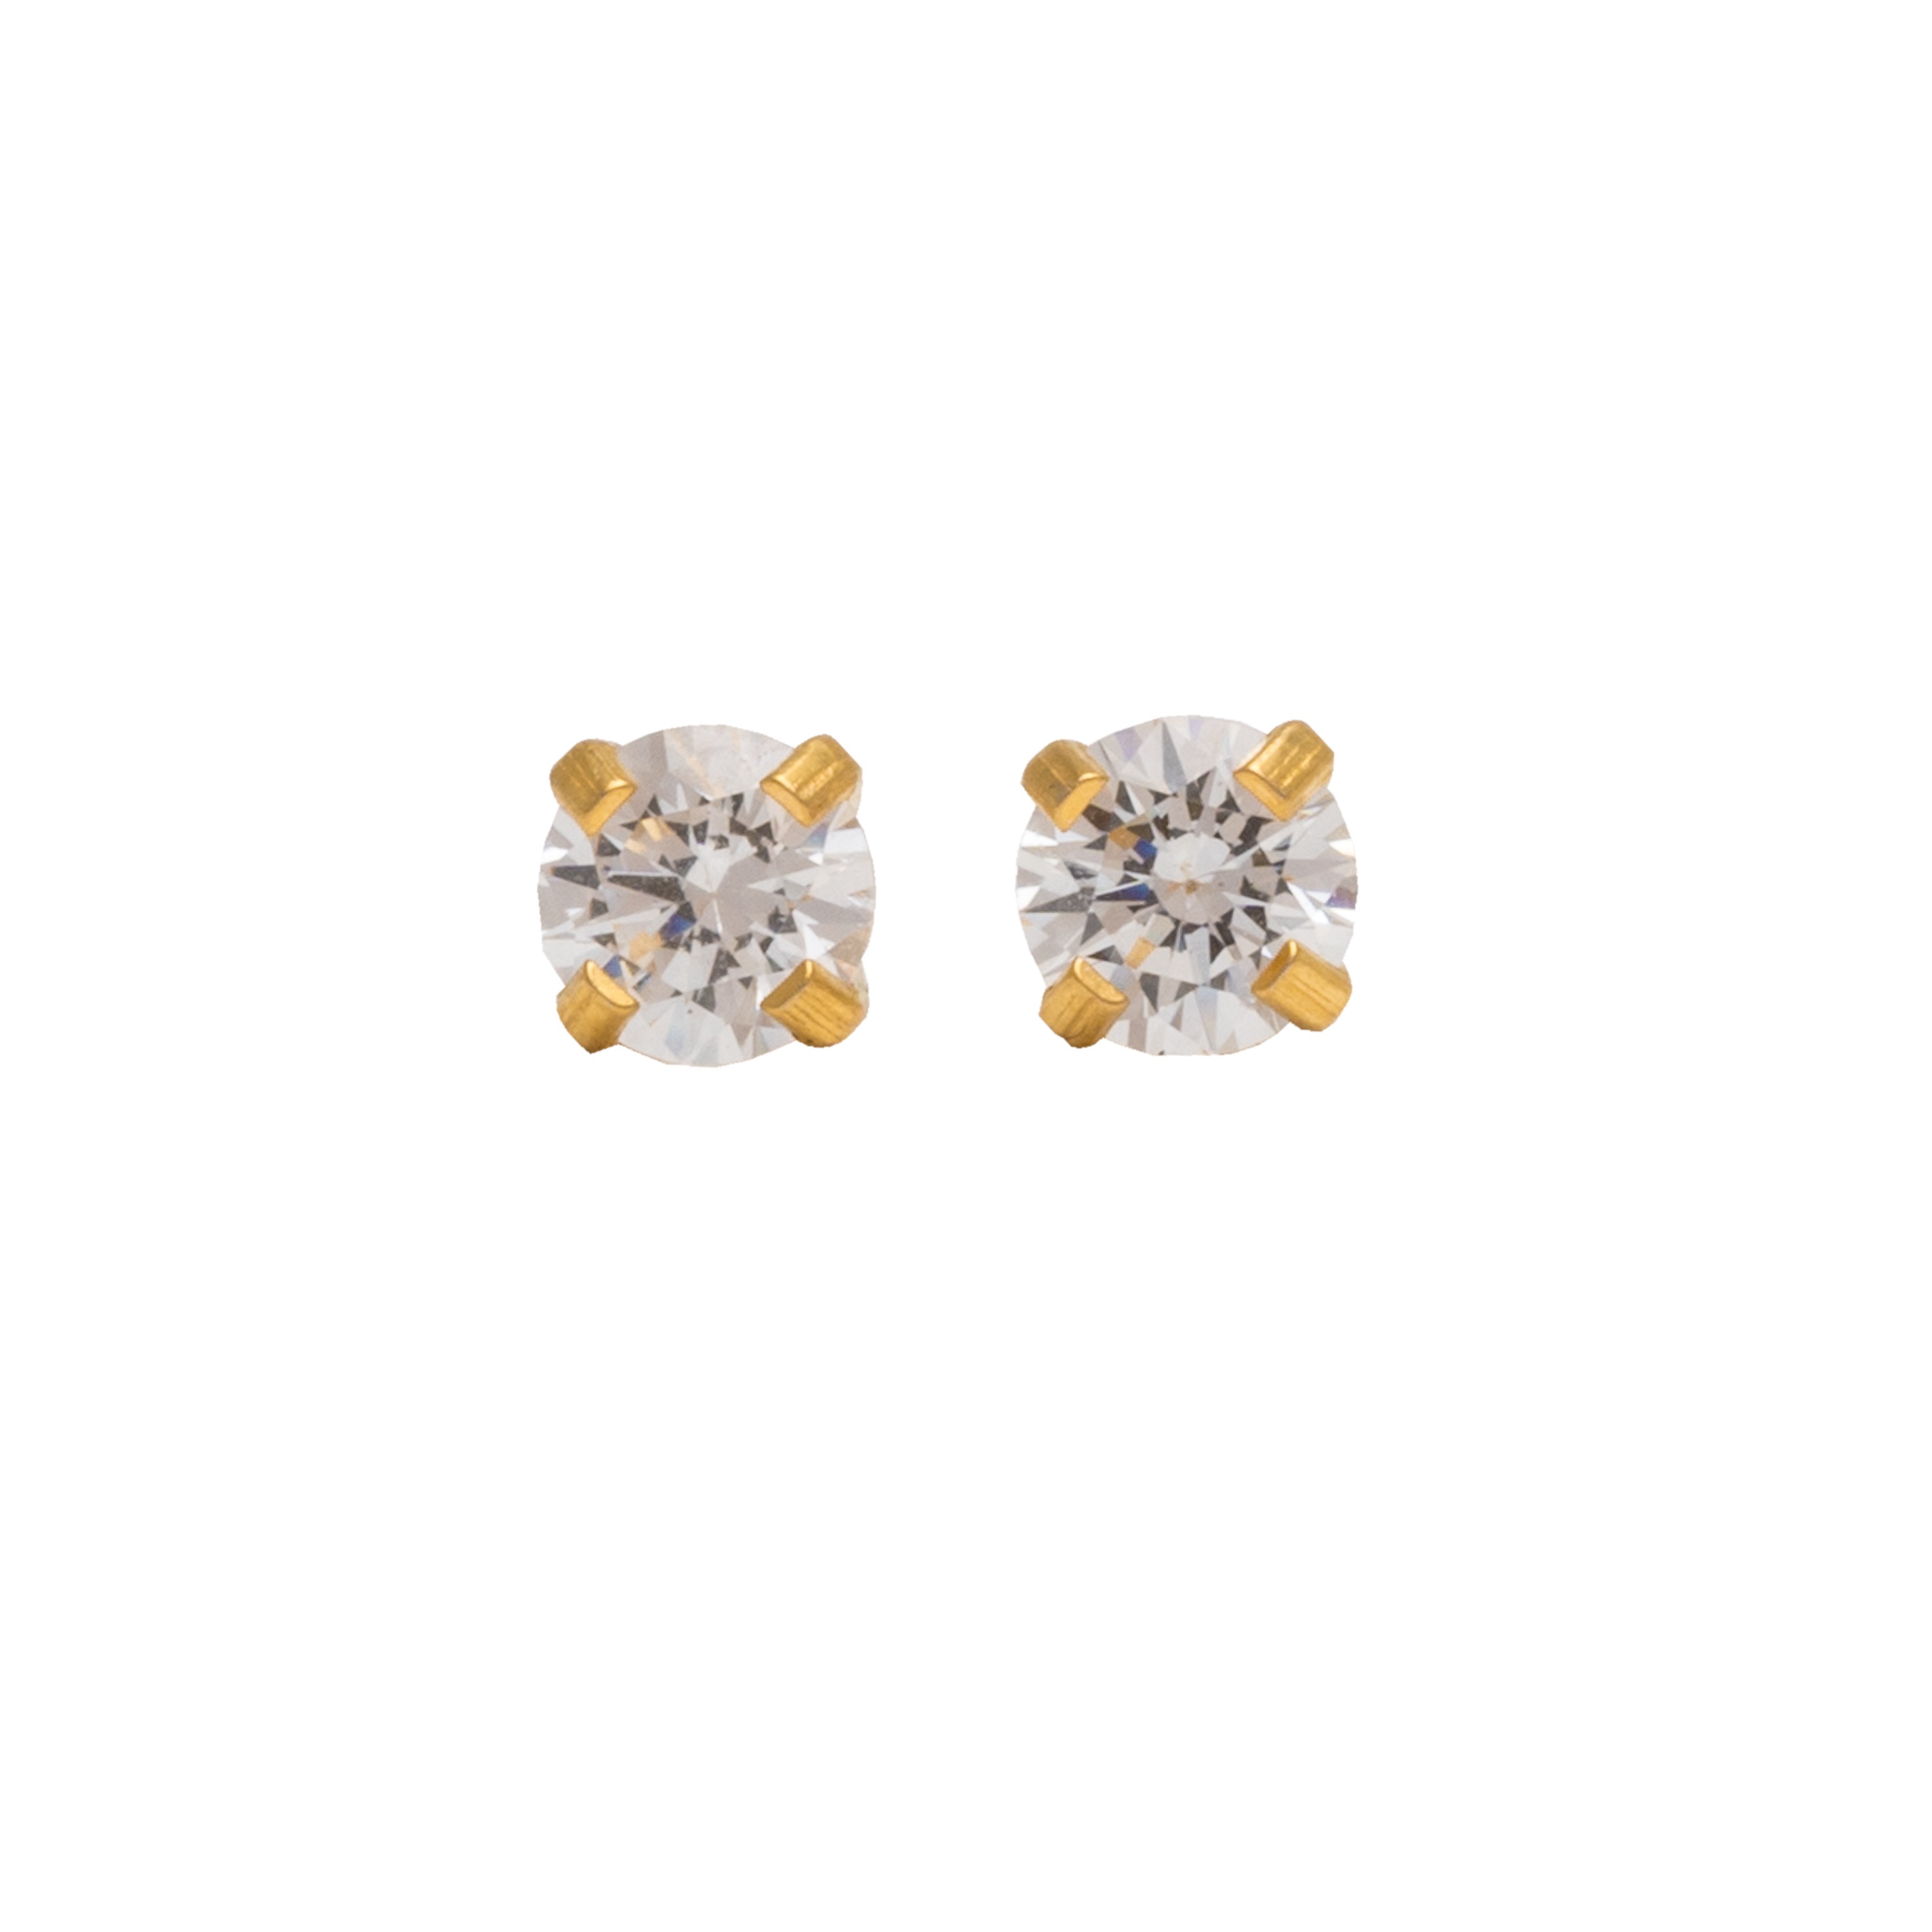 4*4MM - Cubic Zirconia (Square) - Crystal Clear | 24K Gold Plated Simple Yet Stylish, Cute & Trending Fashion Earrings / Ear Studs for Girls & Women Online @ Pakistan | Studex Sensitive (for daily wear)